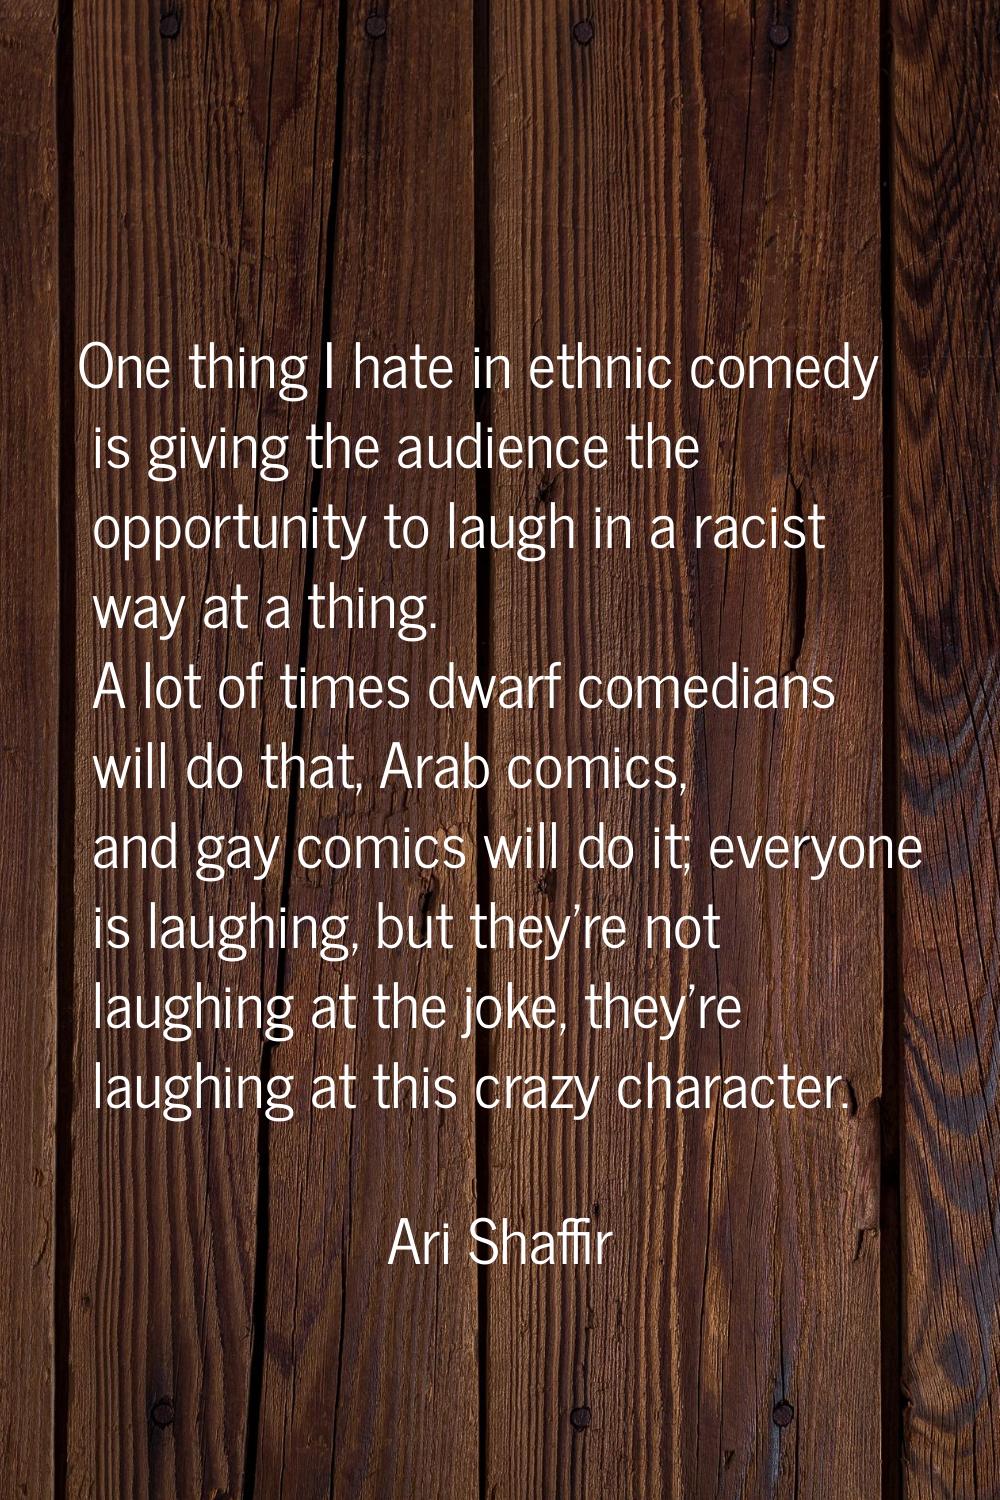 One thing I hate in ethnic comedy is giving the audience the opportunity to laugh in a racist way a